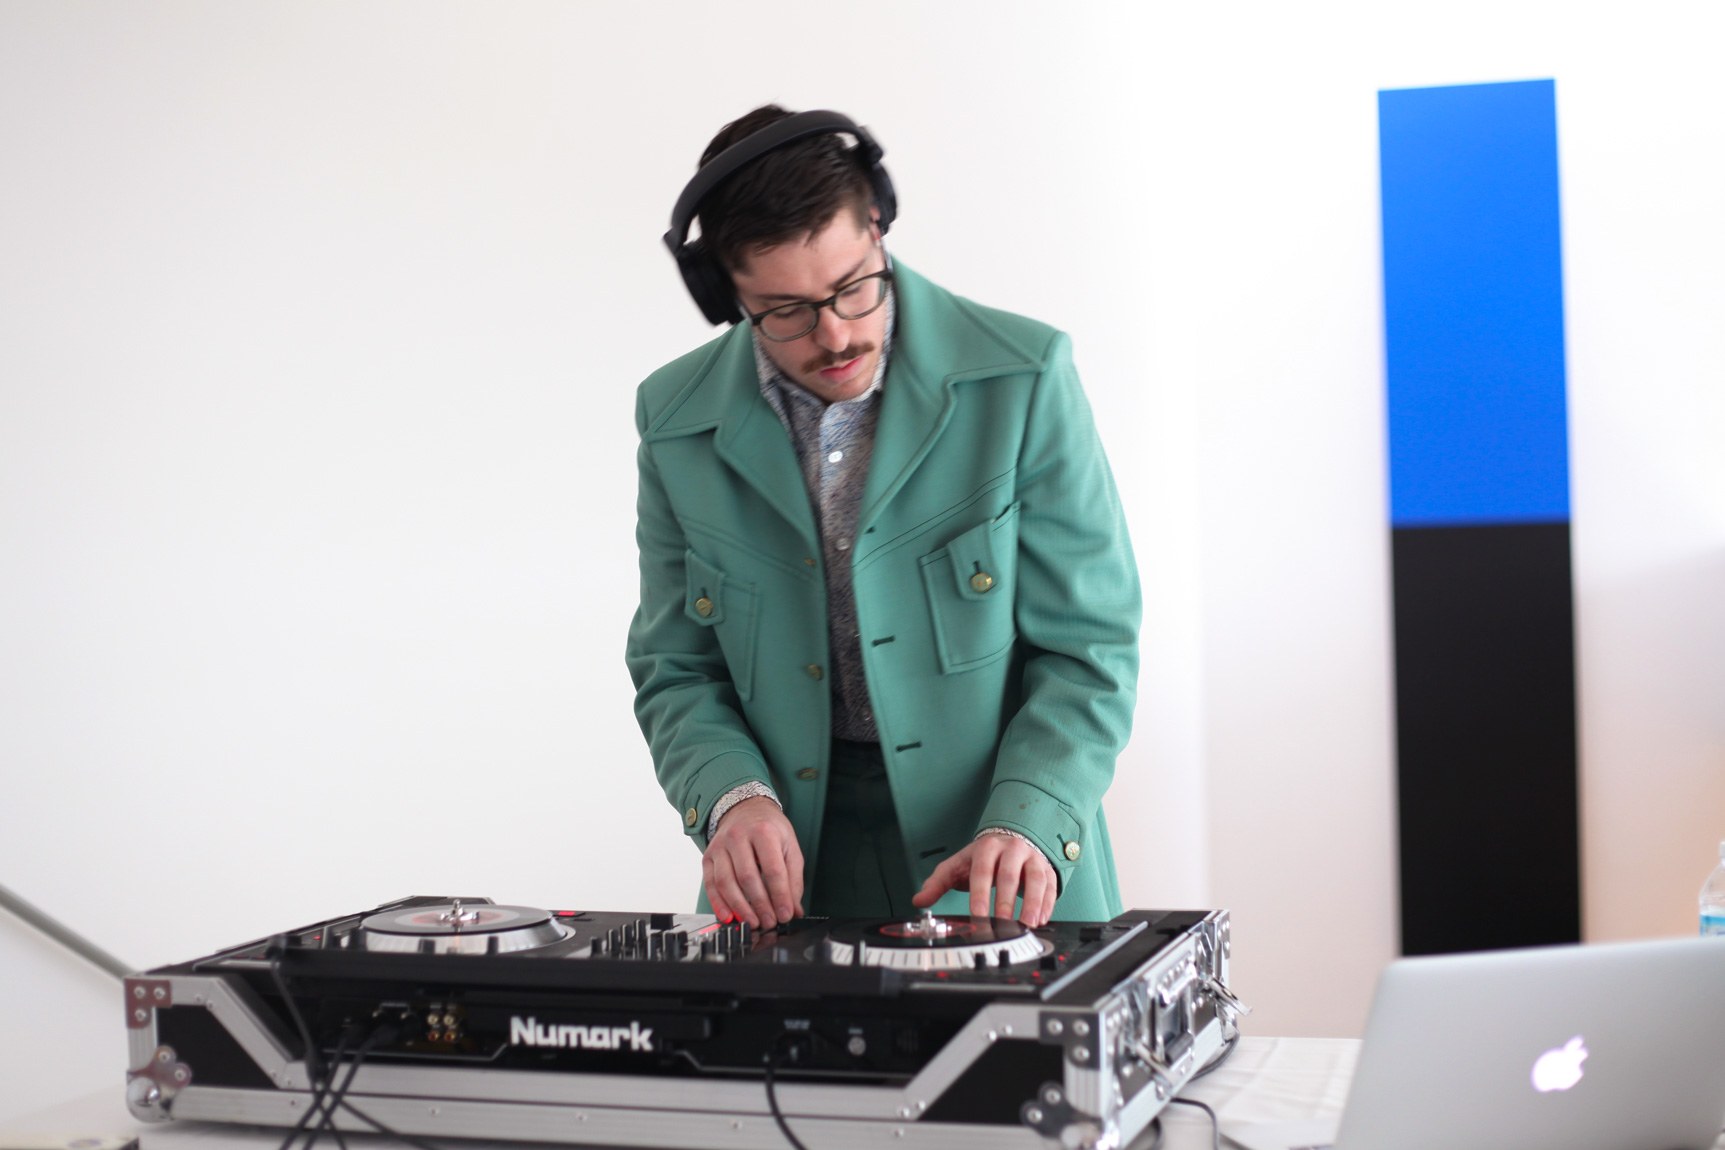 A DJ mixing at a turntable in the Main Gallery, with "Blue Black" by Ellsworth Kelly in the background.